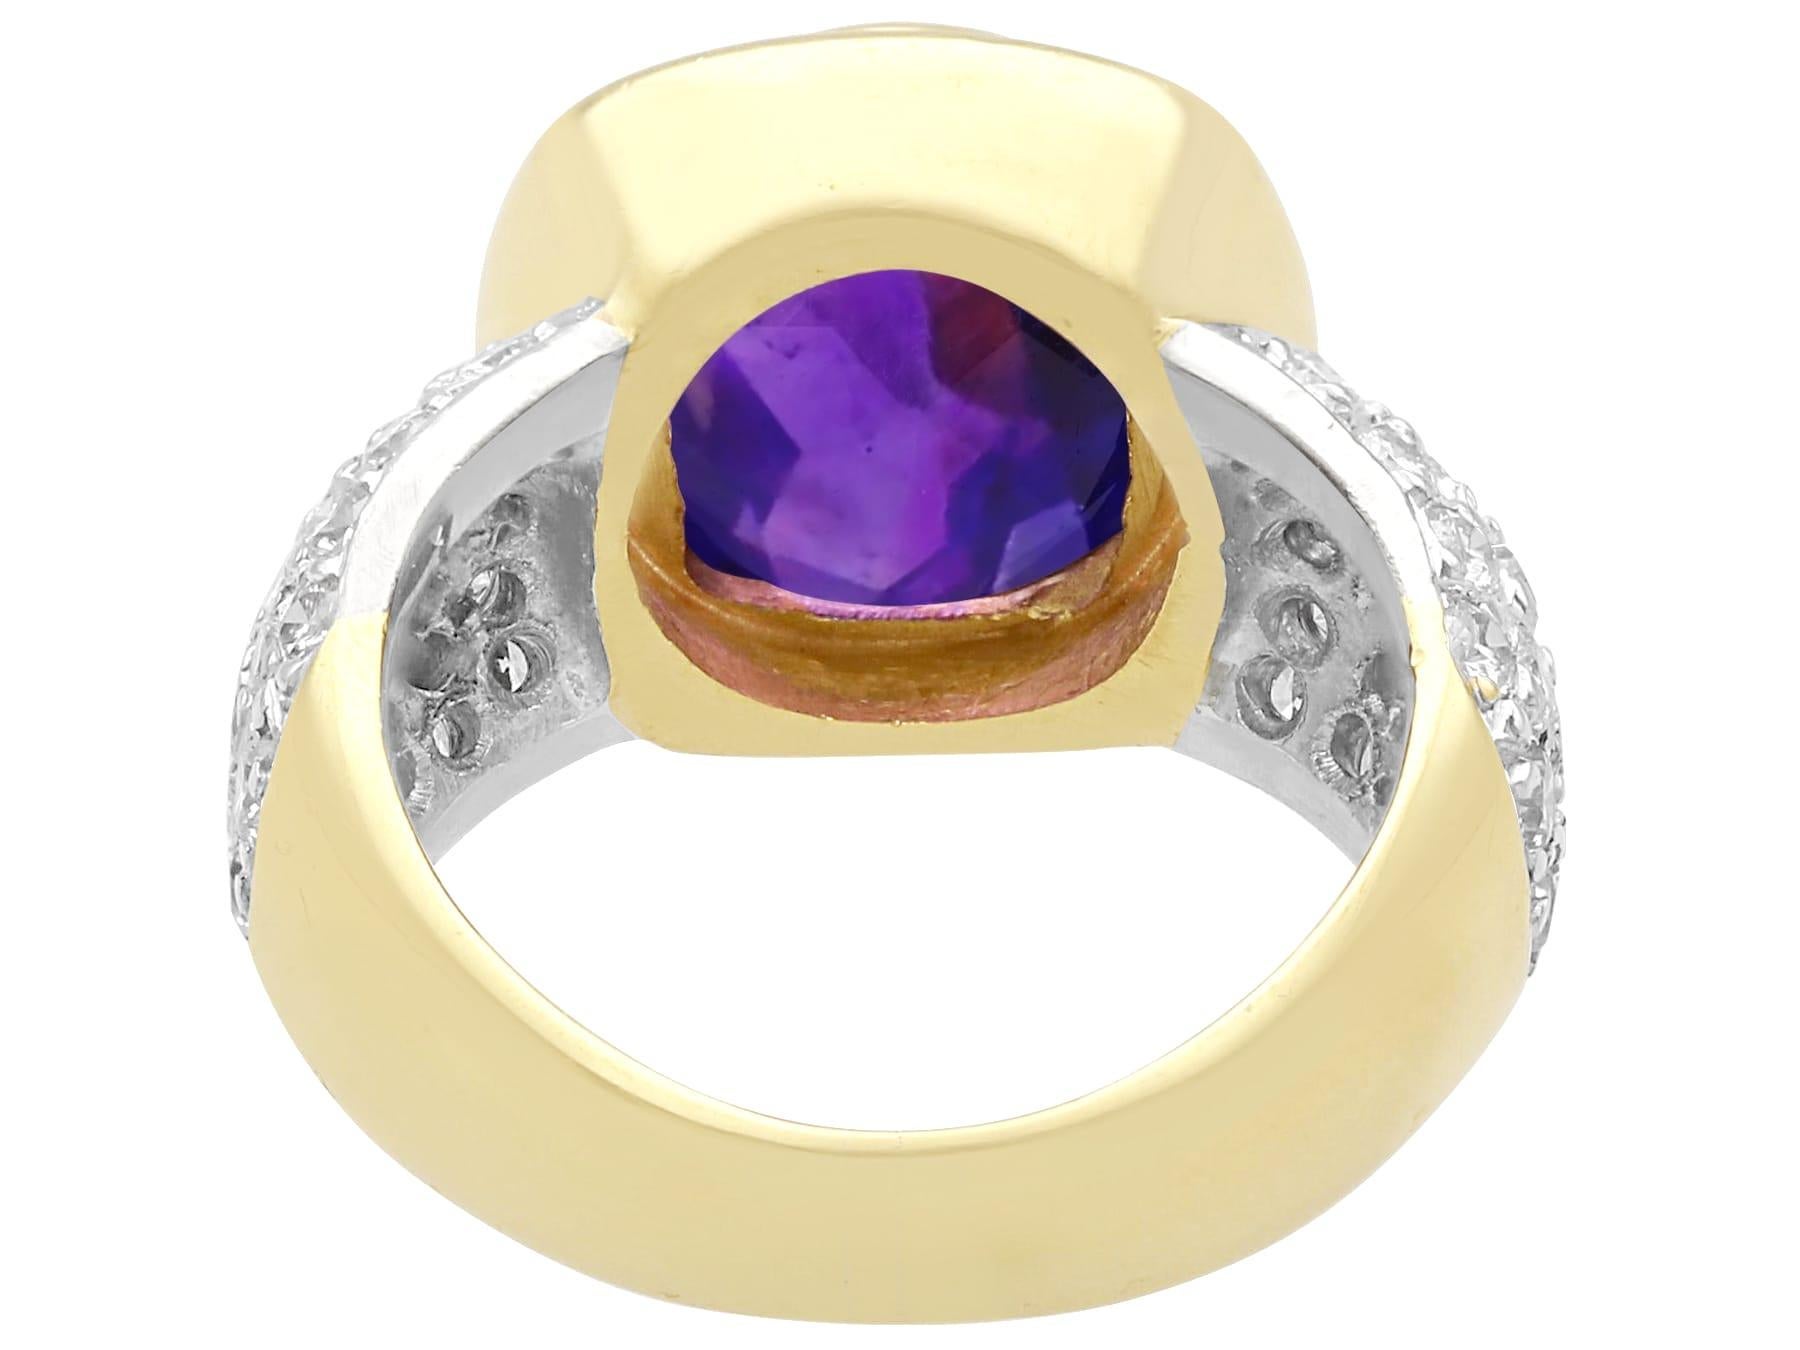 Vintage 4.90ct Amethyst and 0.80ct Diamond 18k Yellow Gold Cocktail Ring In Excellent Condition For Sale In Jesmond, Newcastle Upon Tyne